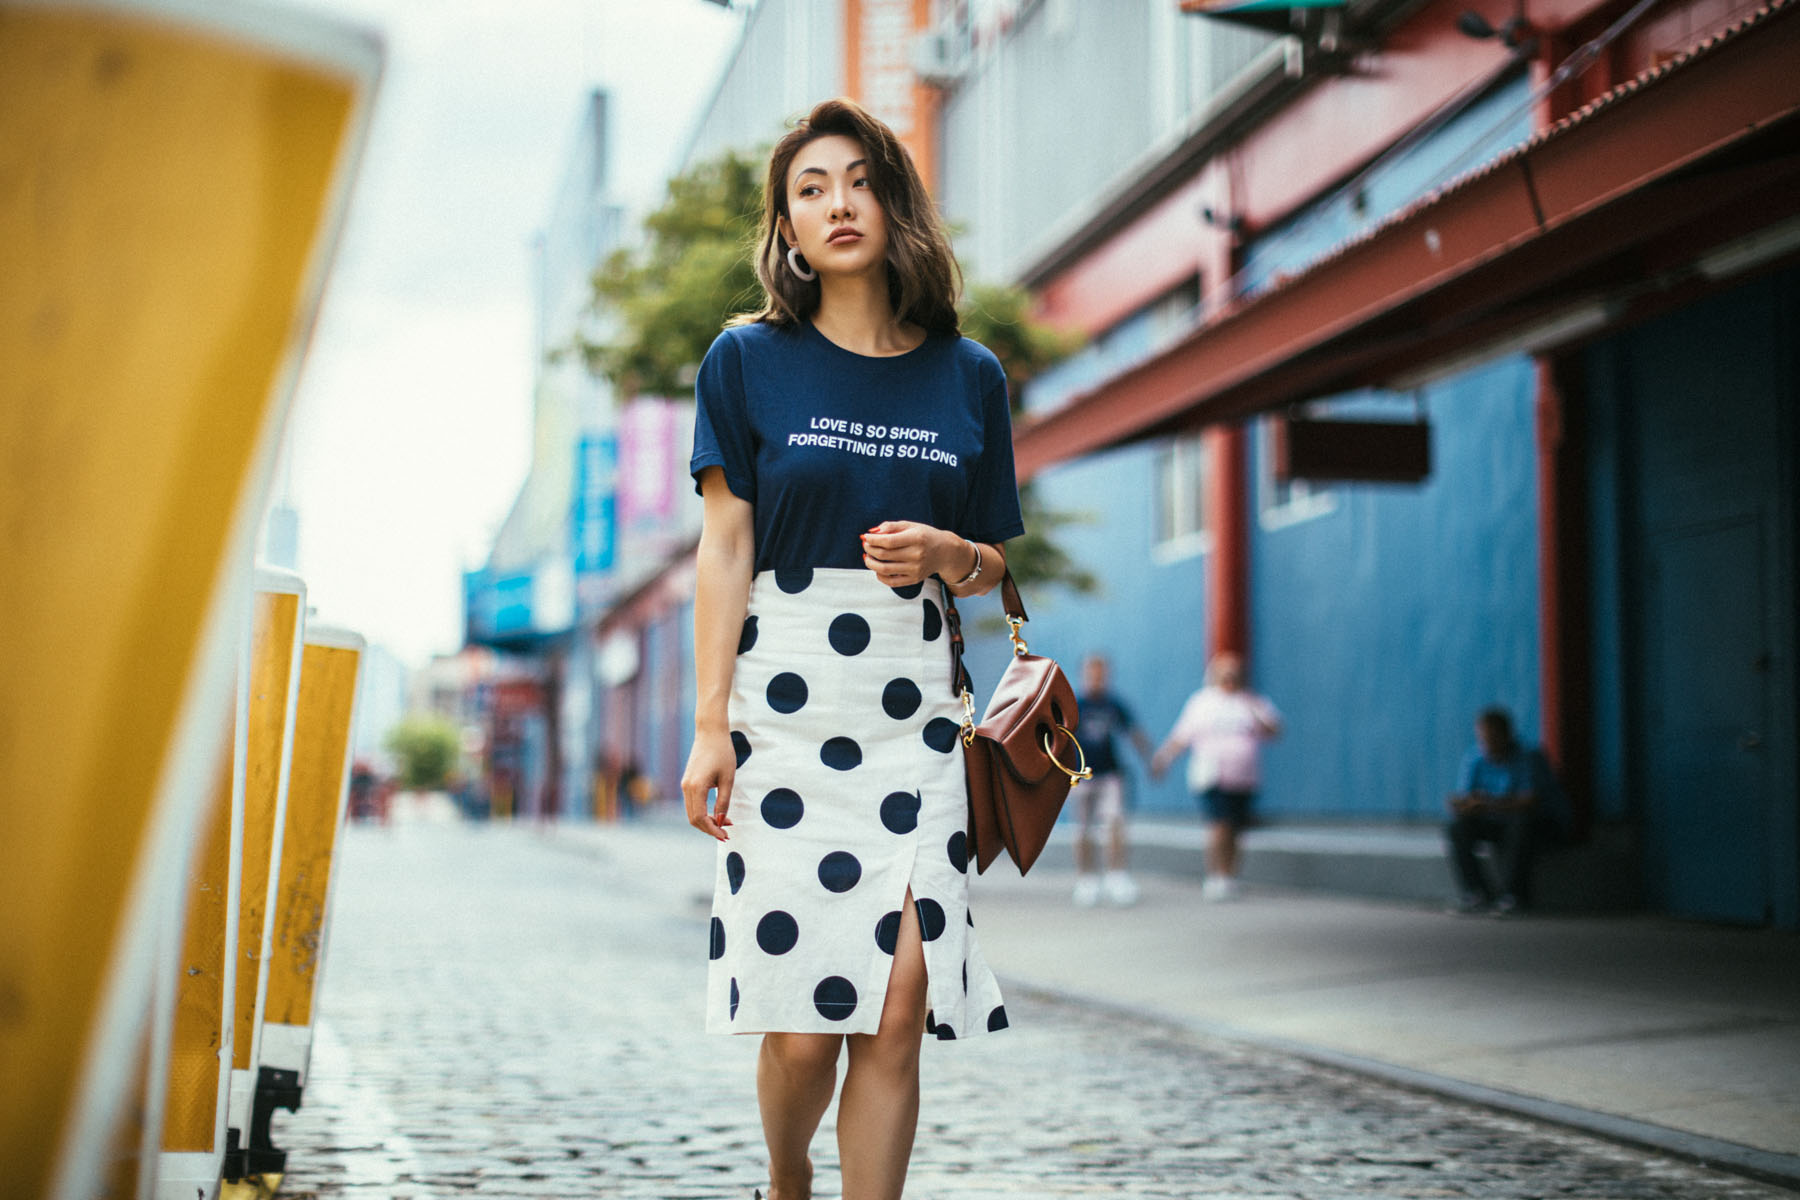 Guide to Wearing Color For Spring - navy top, navy polka dot skirt, white and navy outfit, spring 2018 colors // NotJessFashion.com